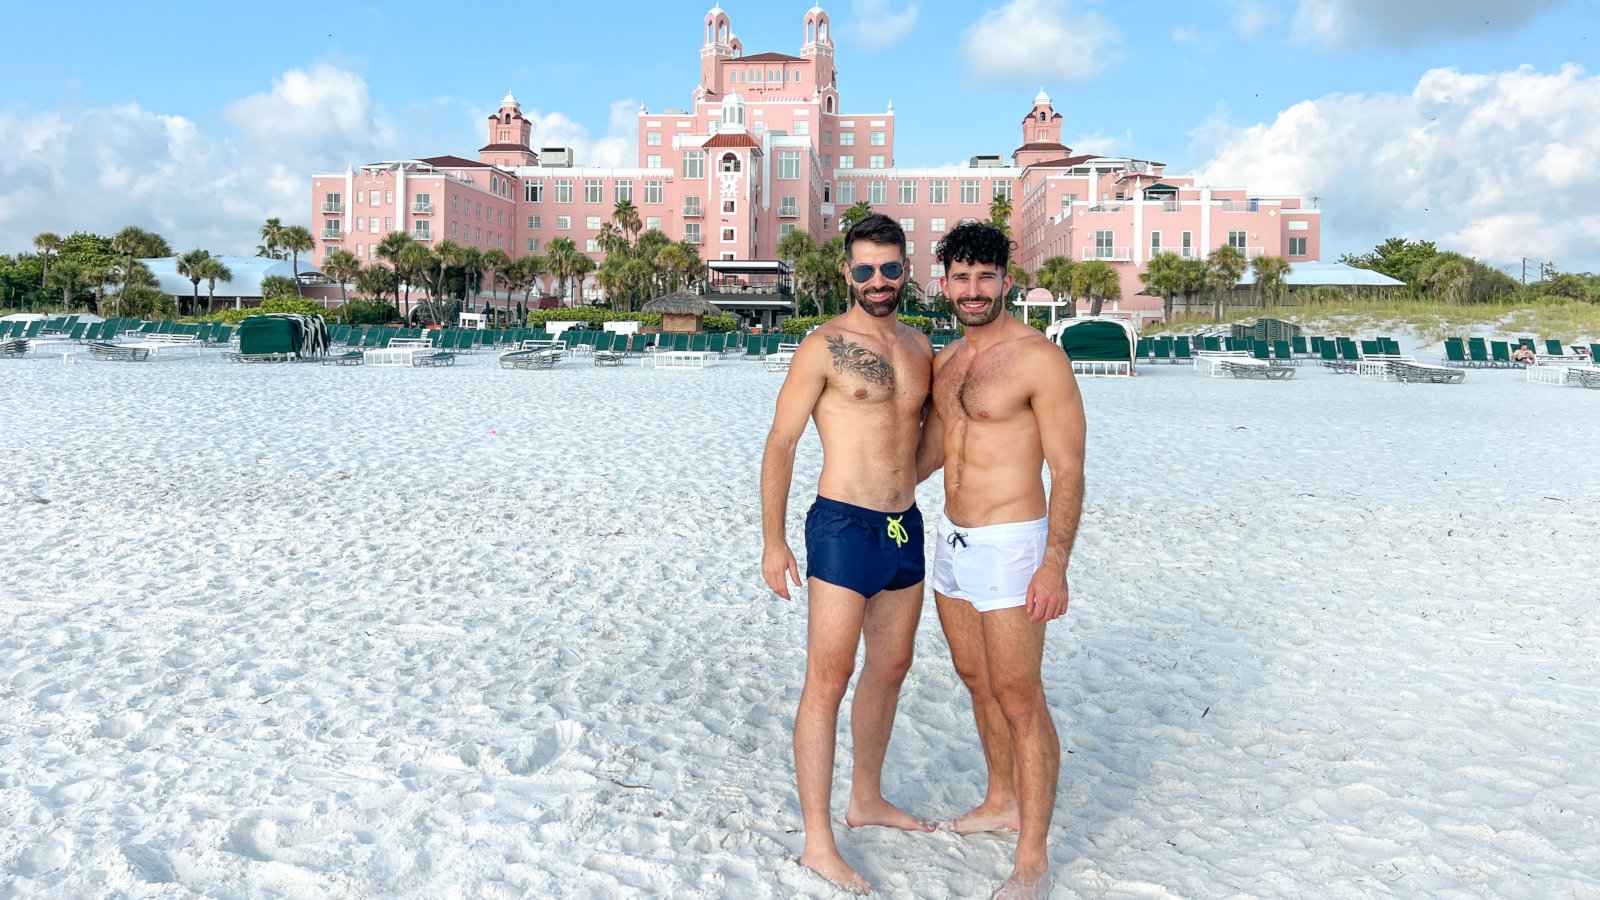 The Don CeSar is a luxurious and pink gay friendly hotel in St Petersburg Florida